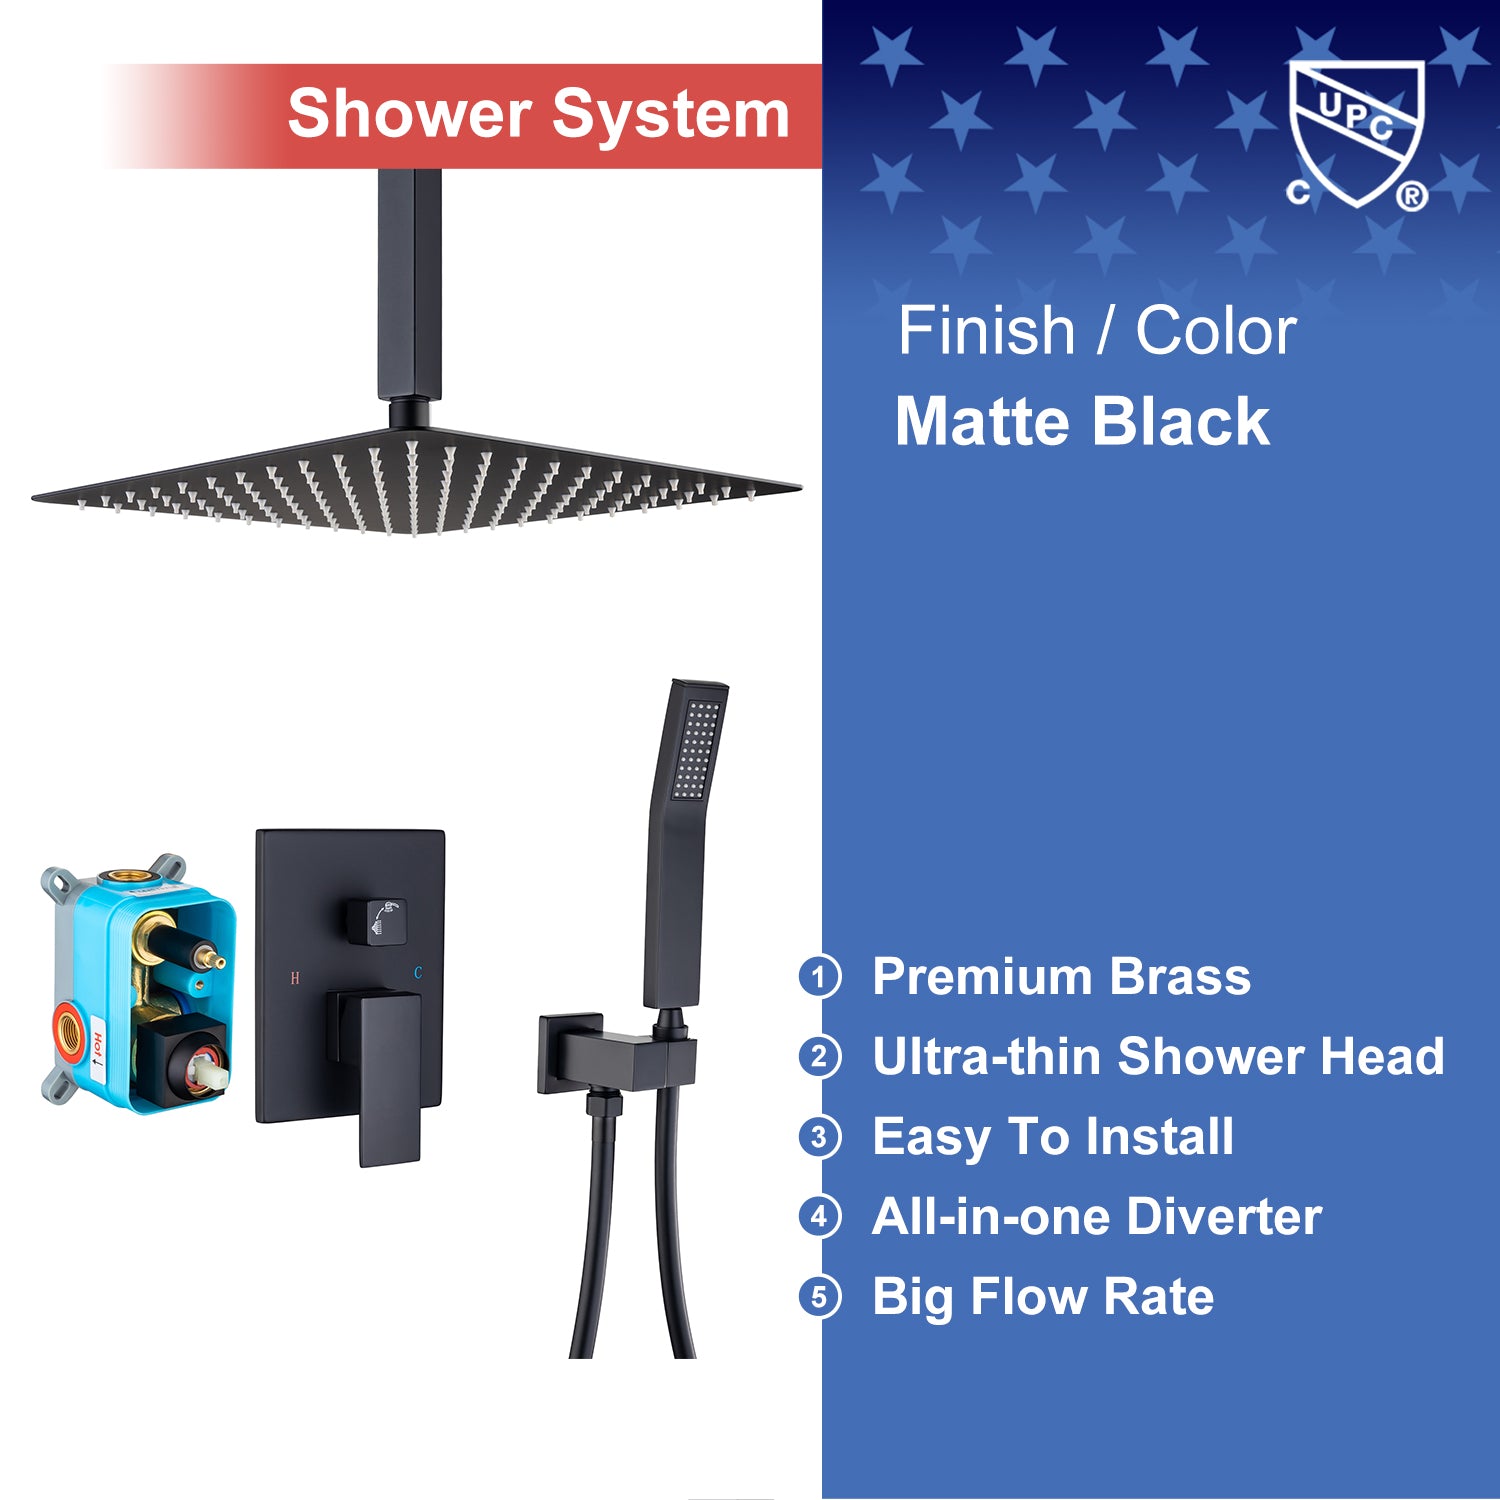 12" Shower Head 2-way Ceiling-Mount Square Shower Faucet with Rough-in Valve RX95102-12